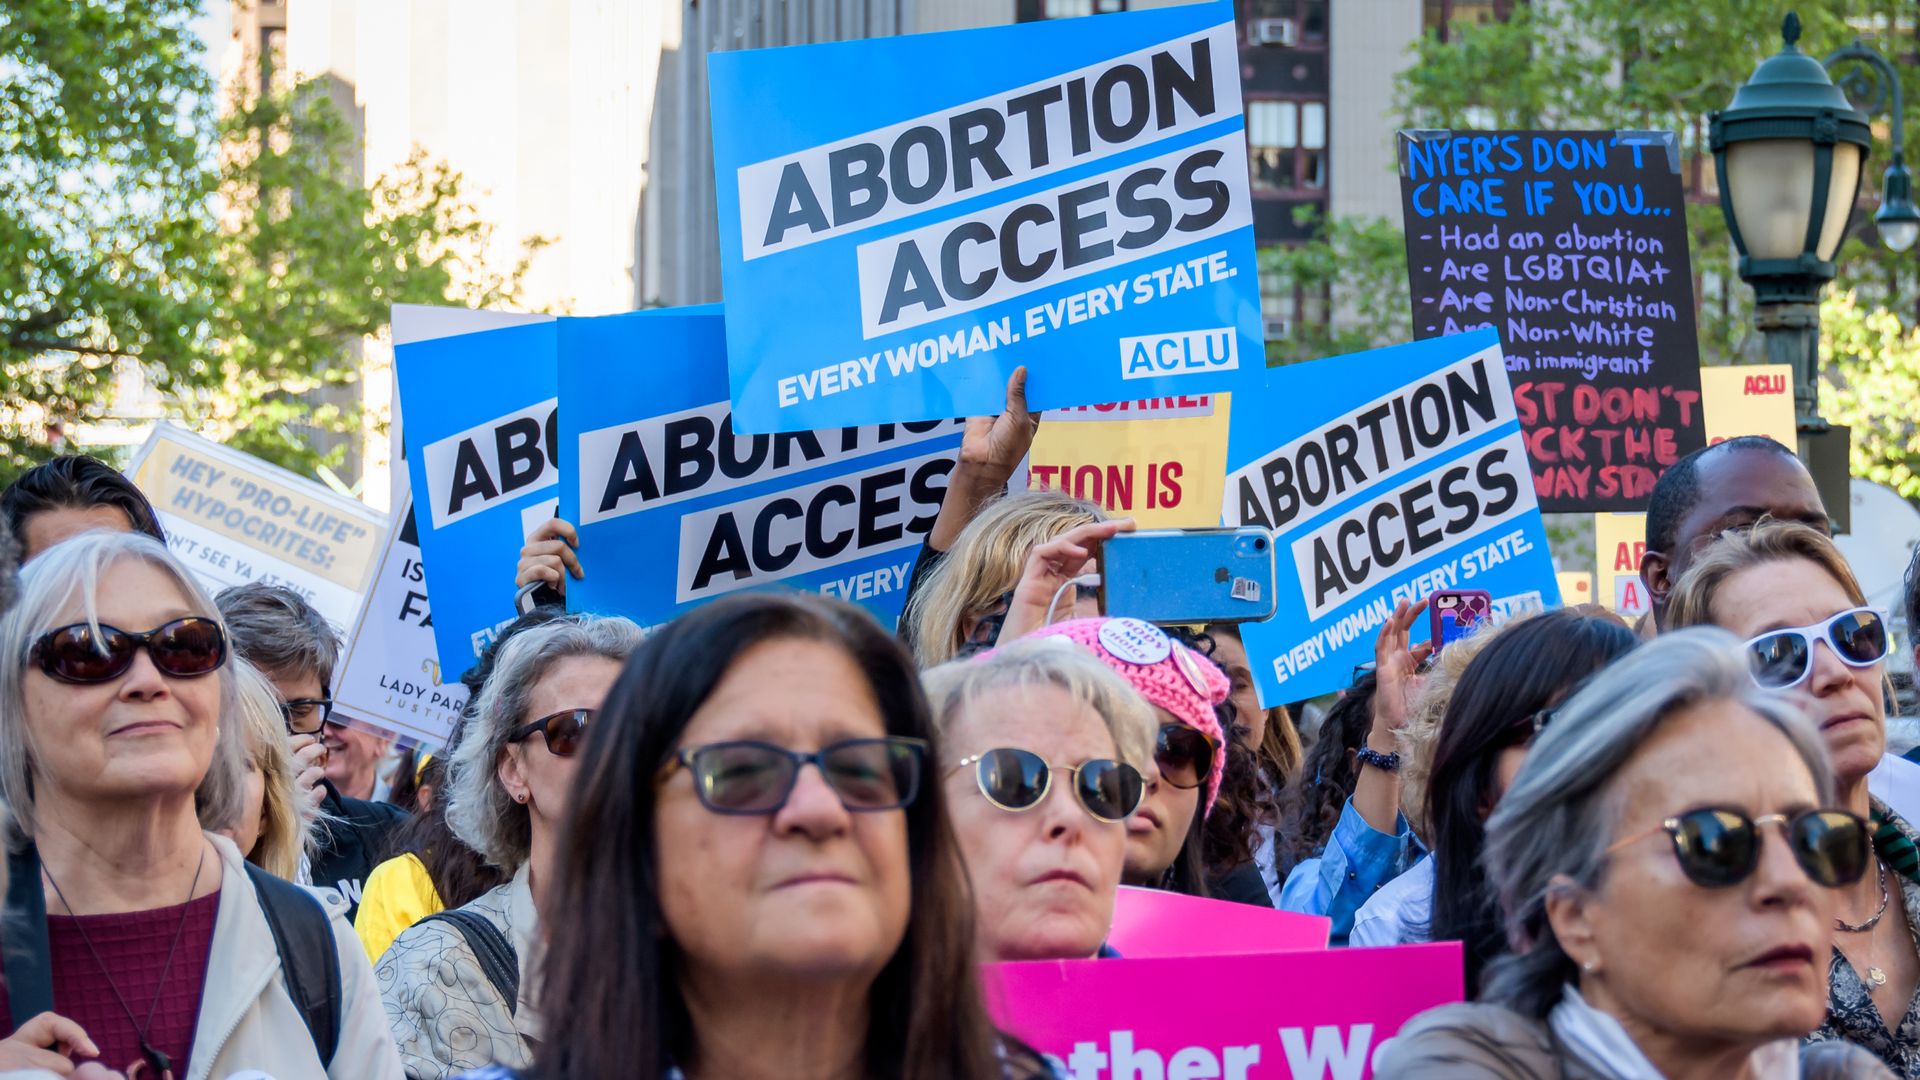 Pro-abortion protesters in New York City